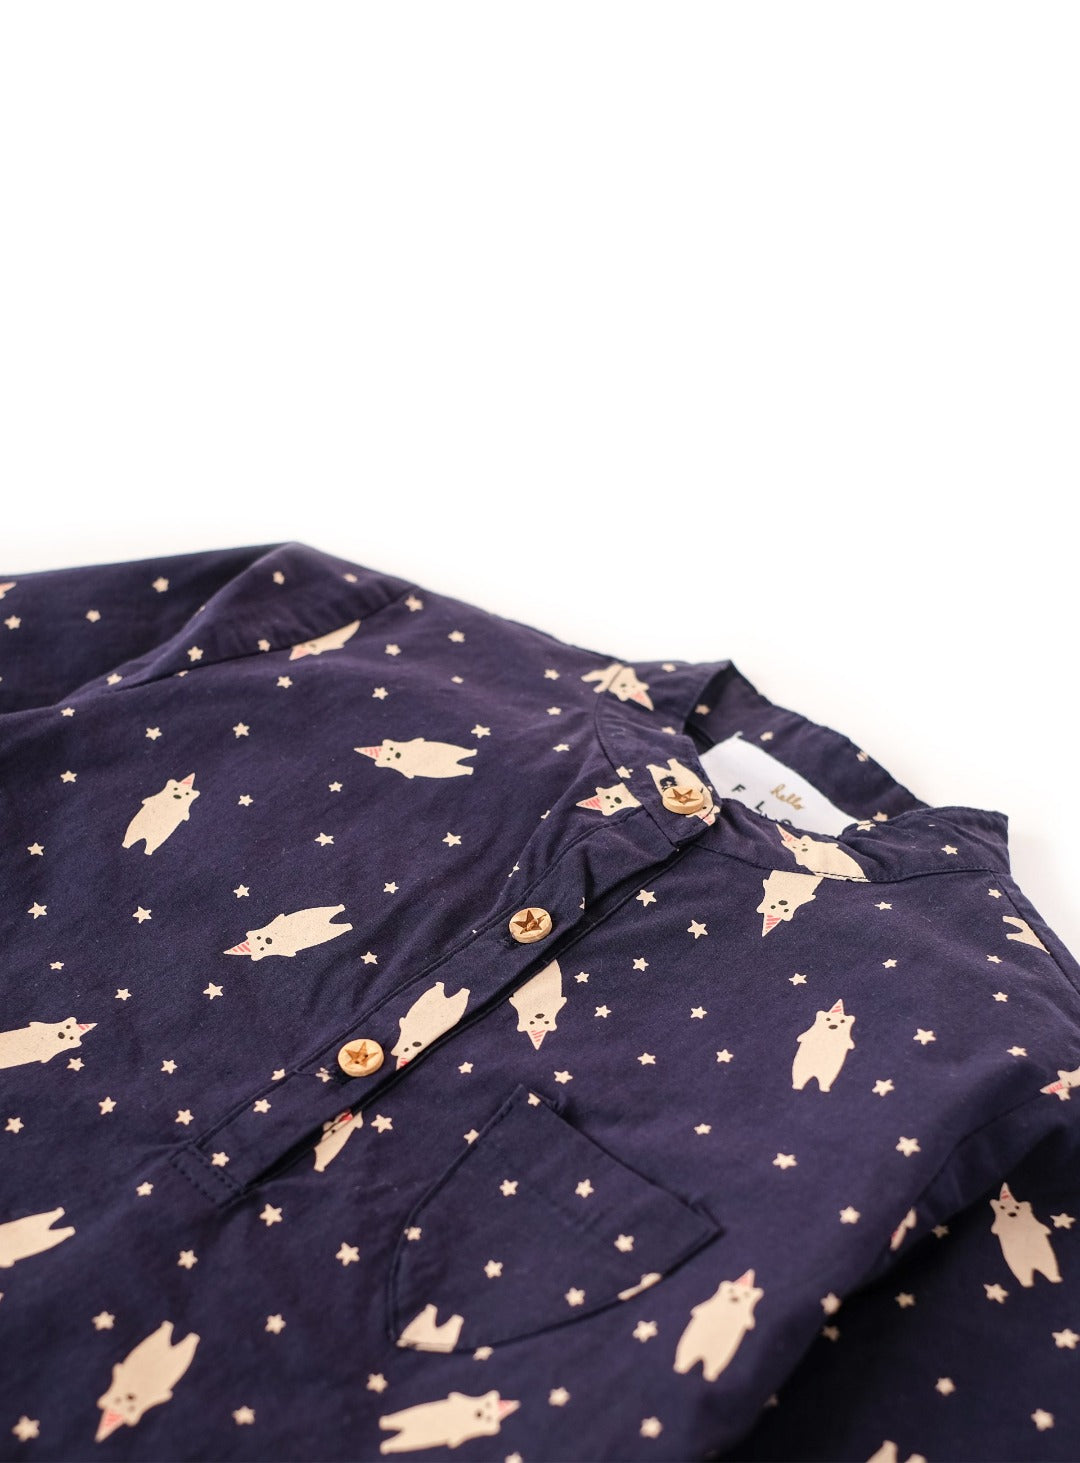 navy blue shirt with bears and stars print